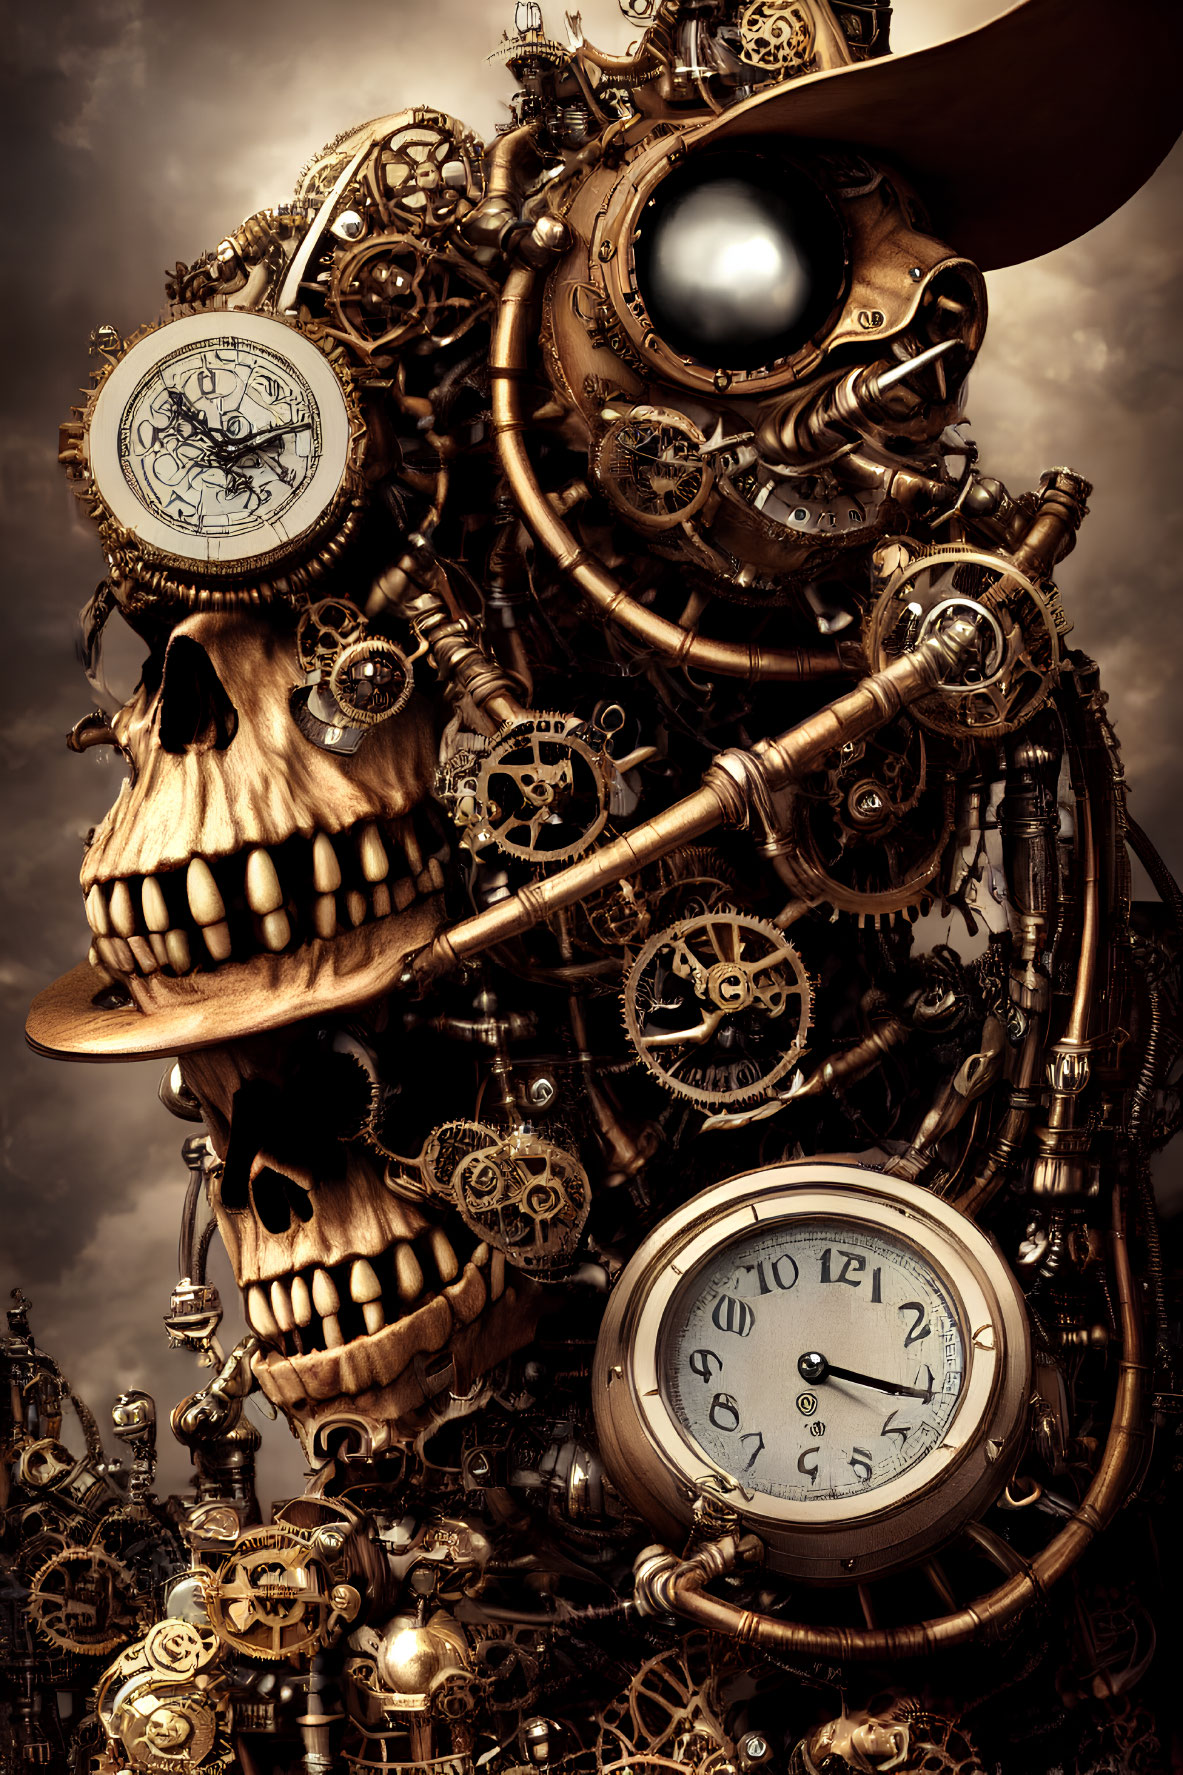 Steampunk-themed composition with skull, cogs, gears, clocks, and mechanical elements in vintage